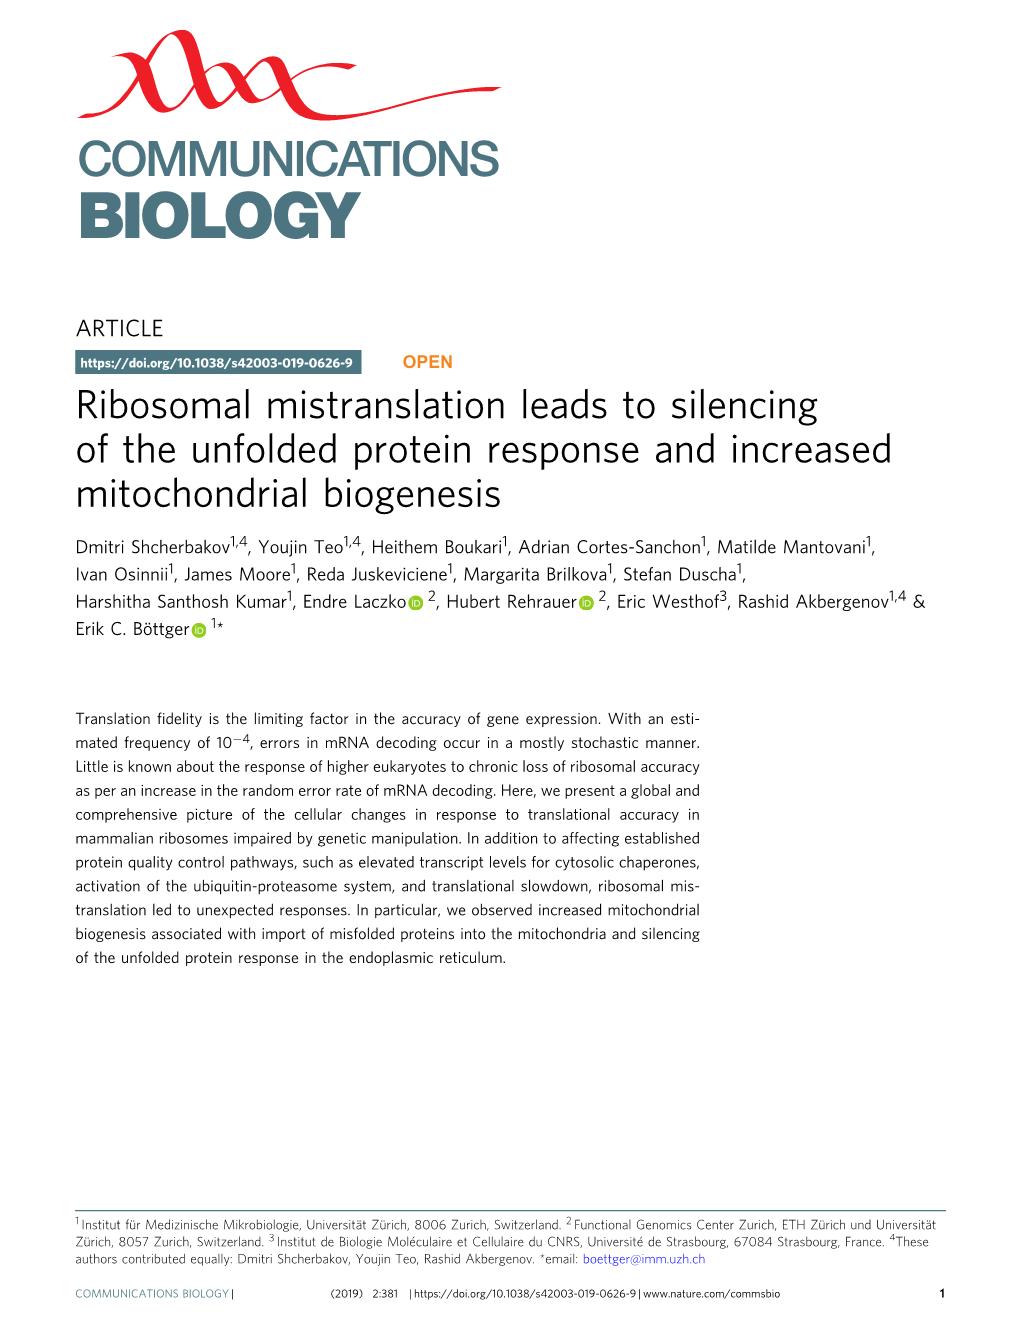 Ribosomal Mistranslation Leads to Silencing of the Unfolded Protein Response and Increased Mitochondrial Biogenesis